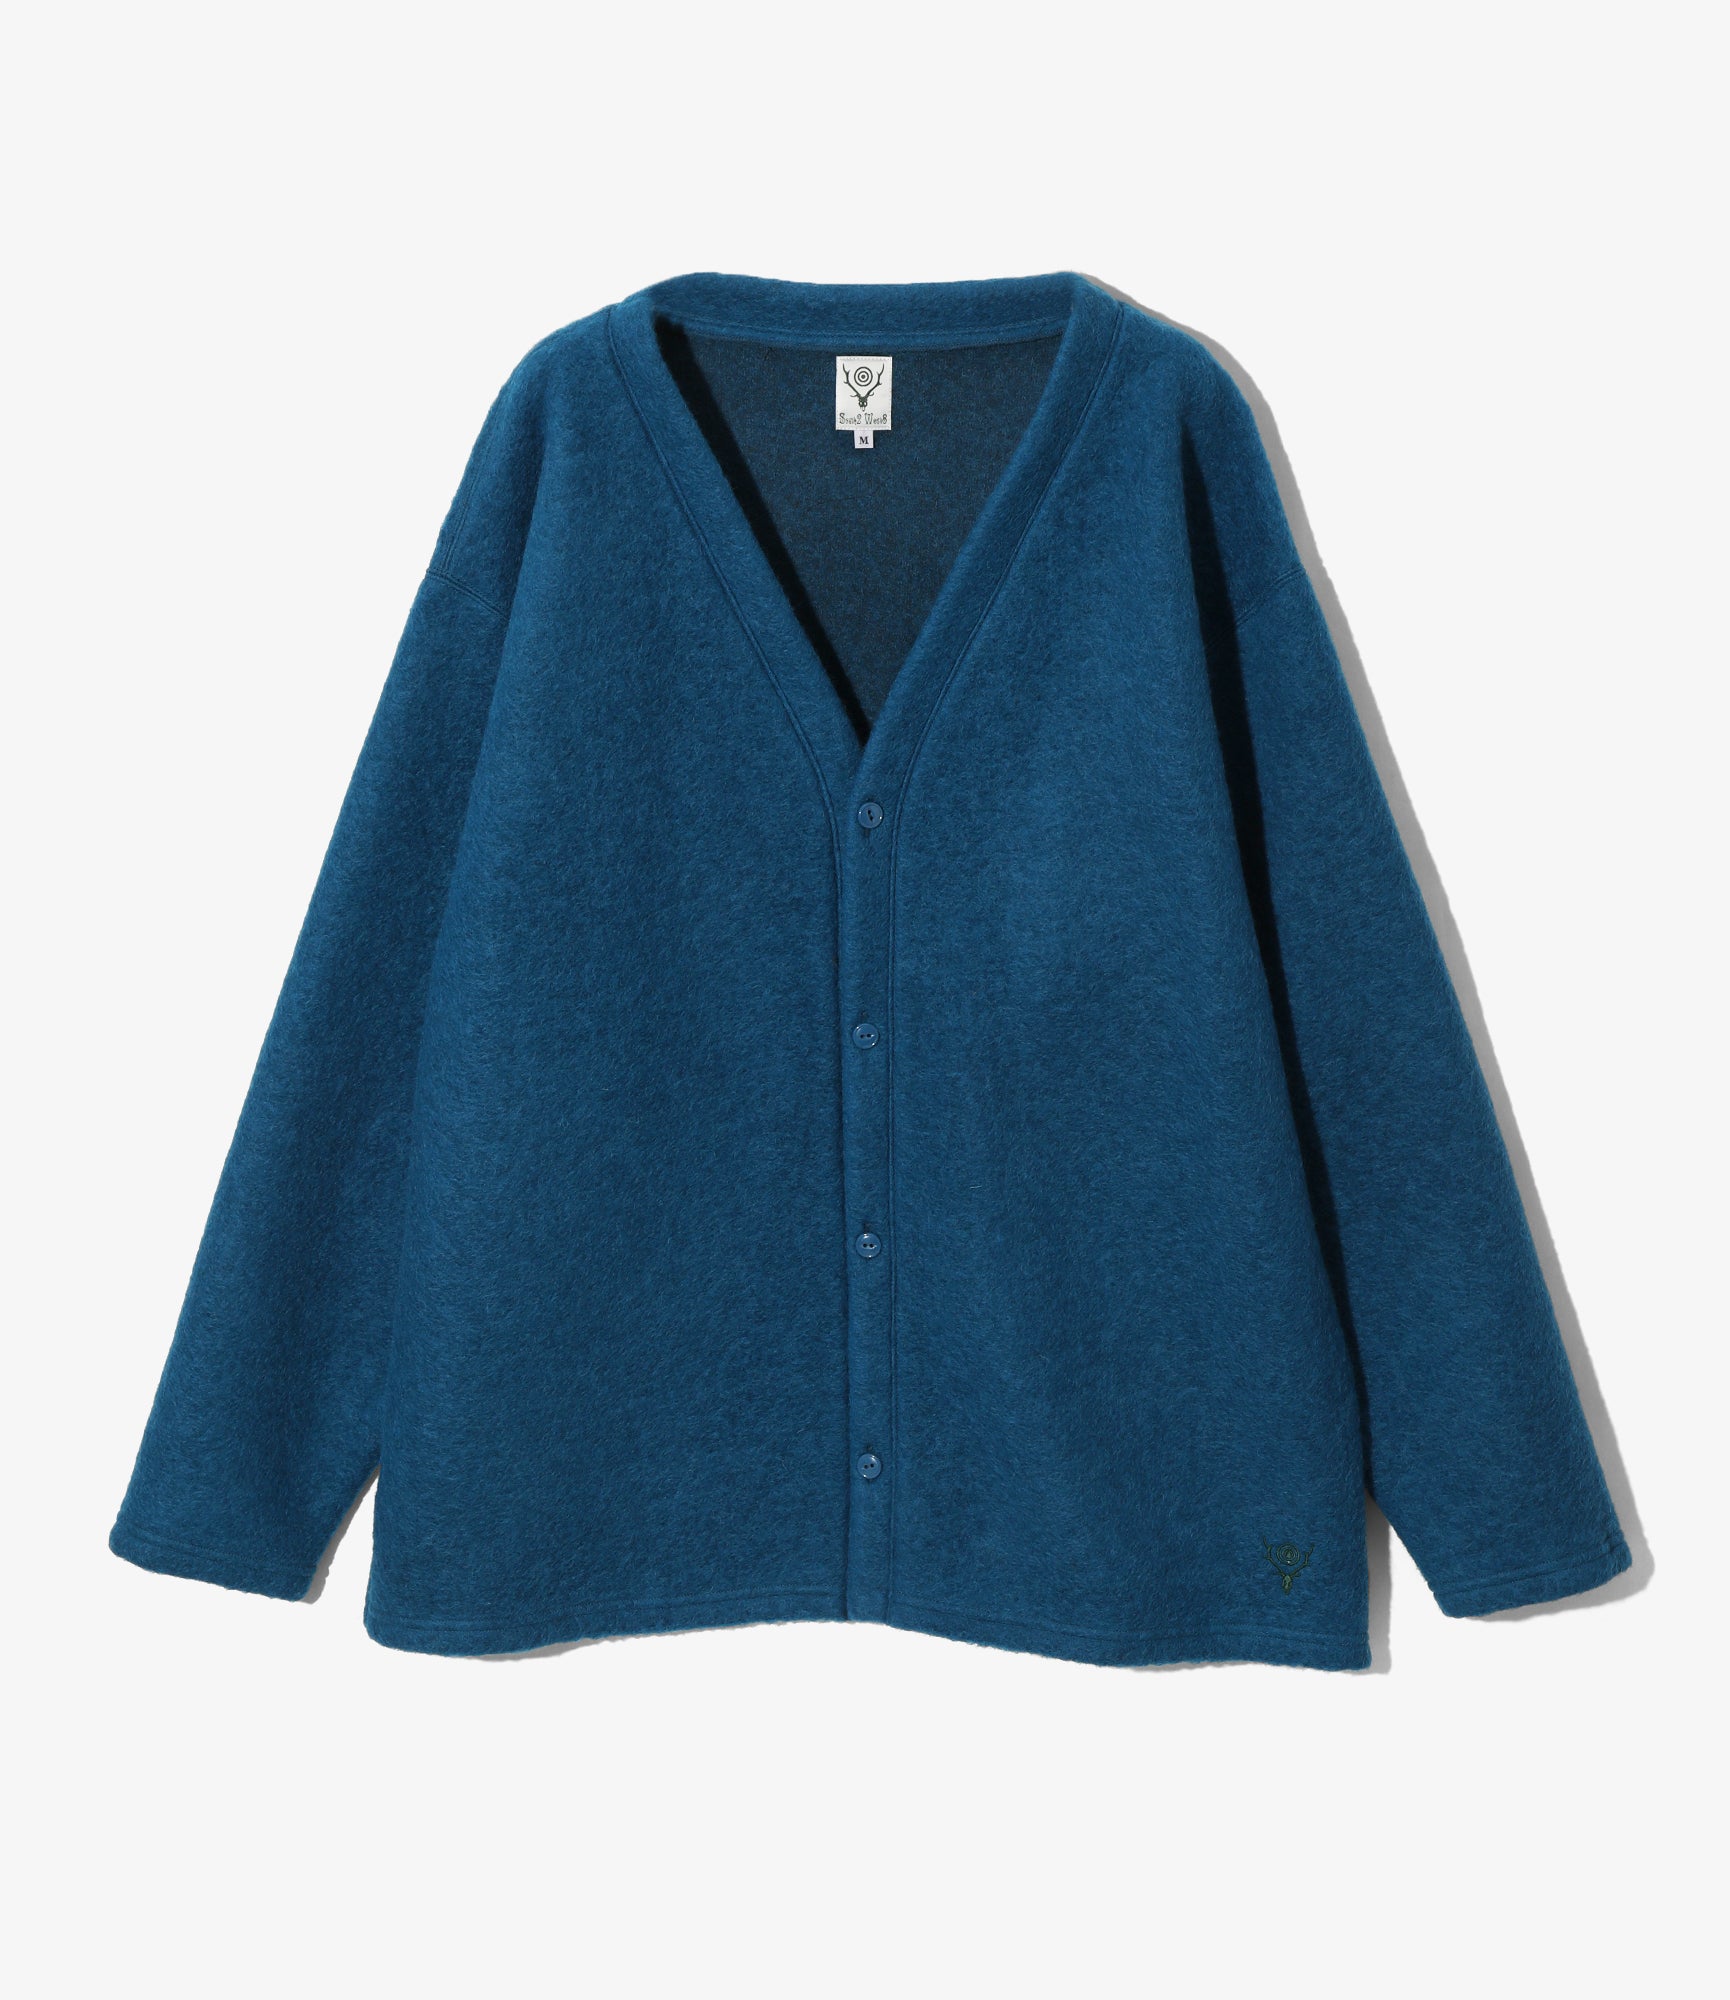 South2 West8 S.S. V Neck Cardigan - W/PE Boiled Jersey - Blue